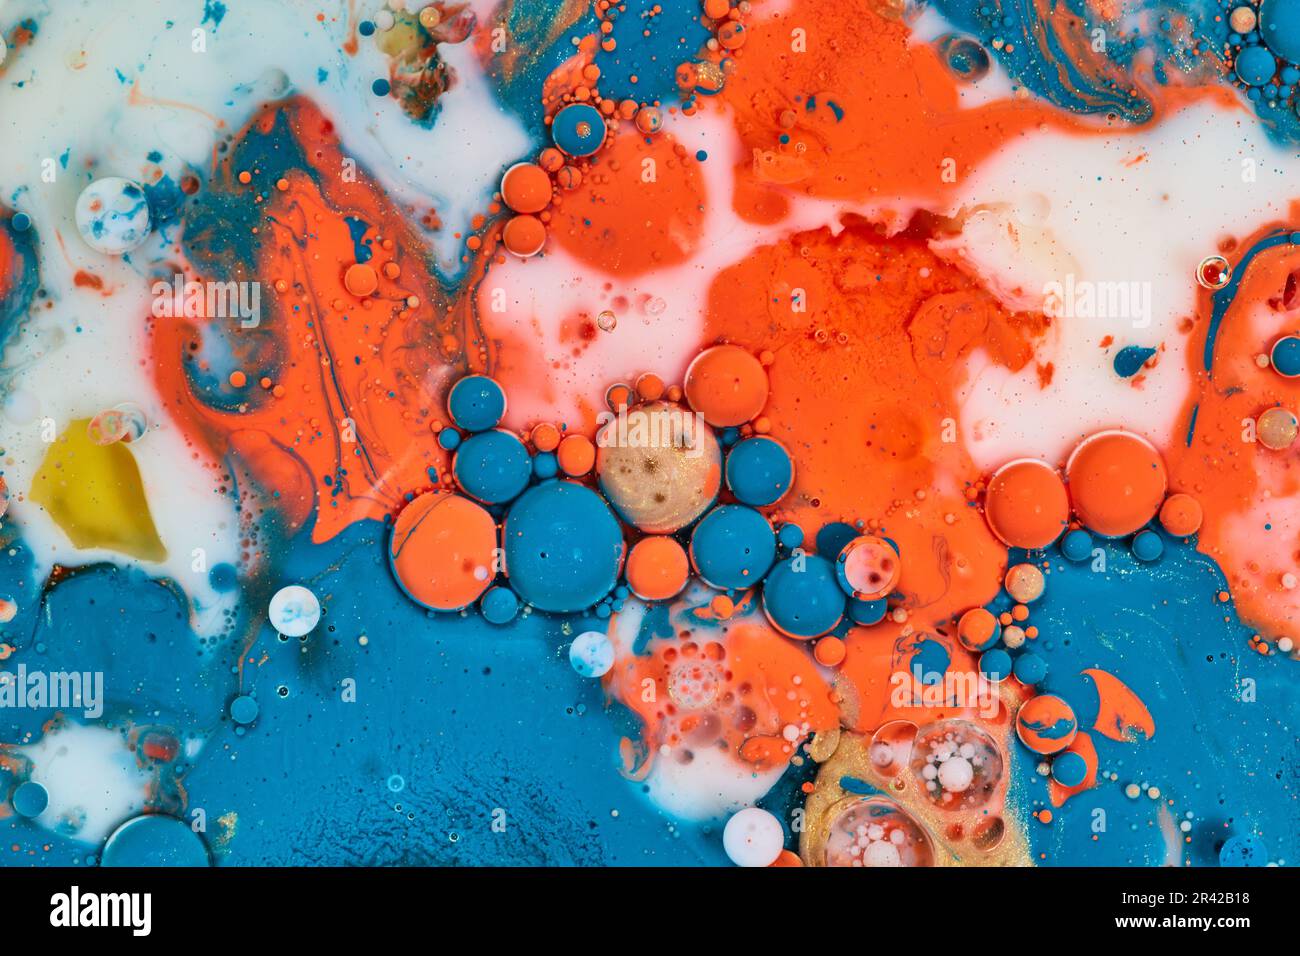 Horizontal acrylic pour creating abstract painting with orange blue and white oil bubbles in milk background asset Stock Photo